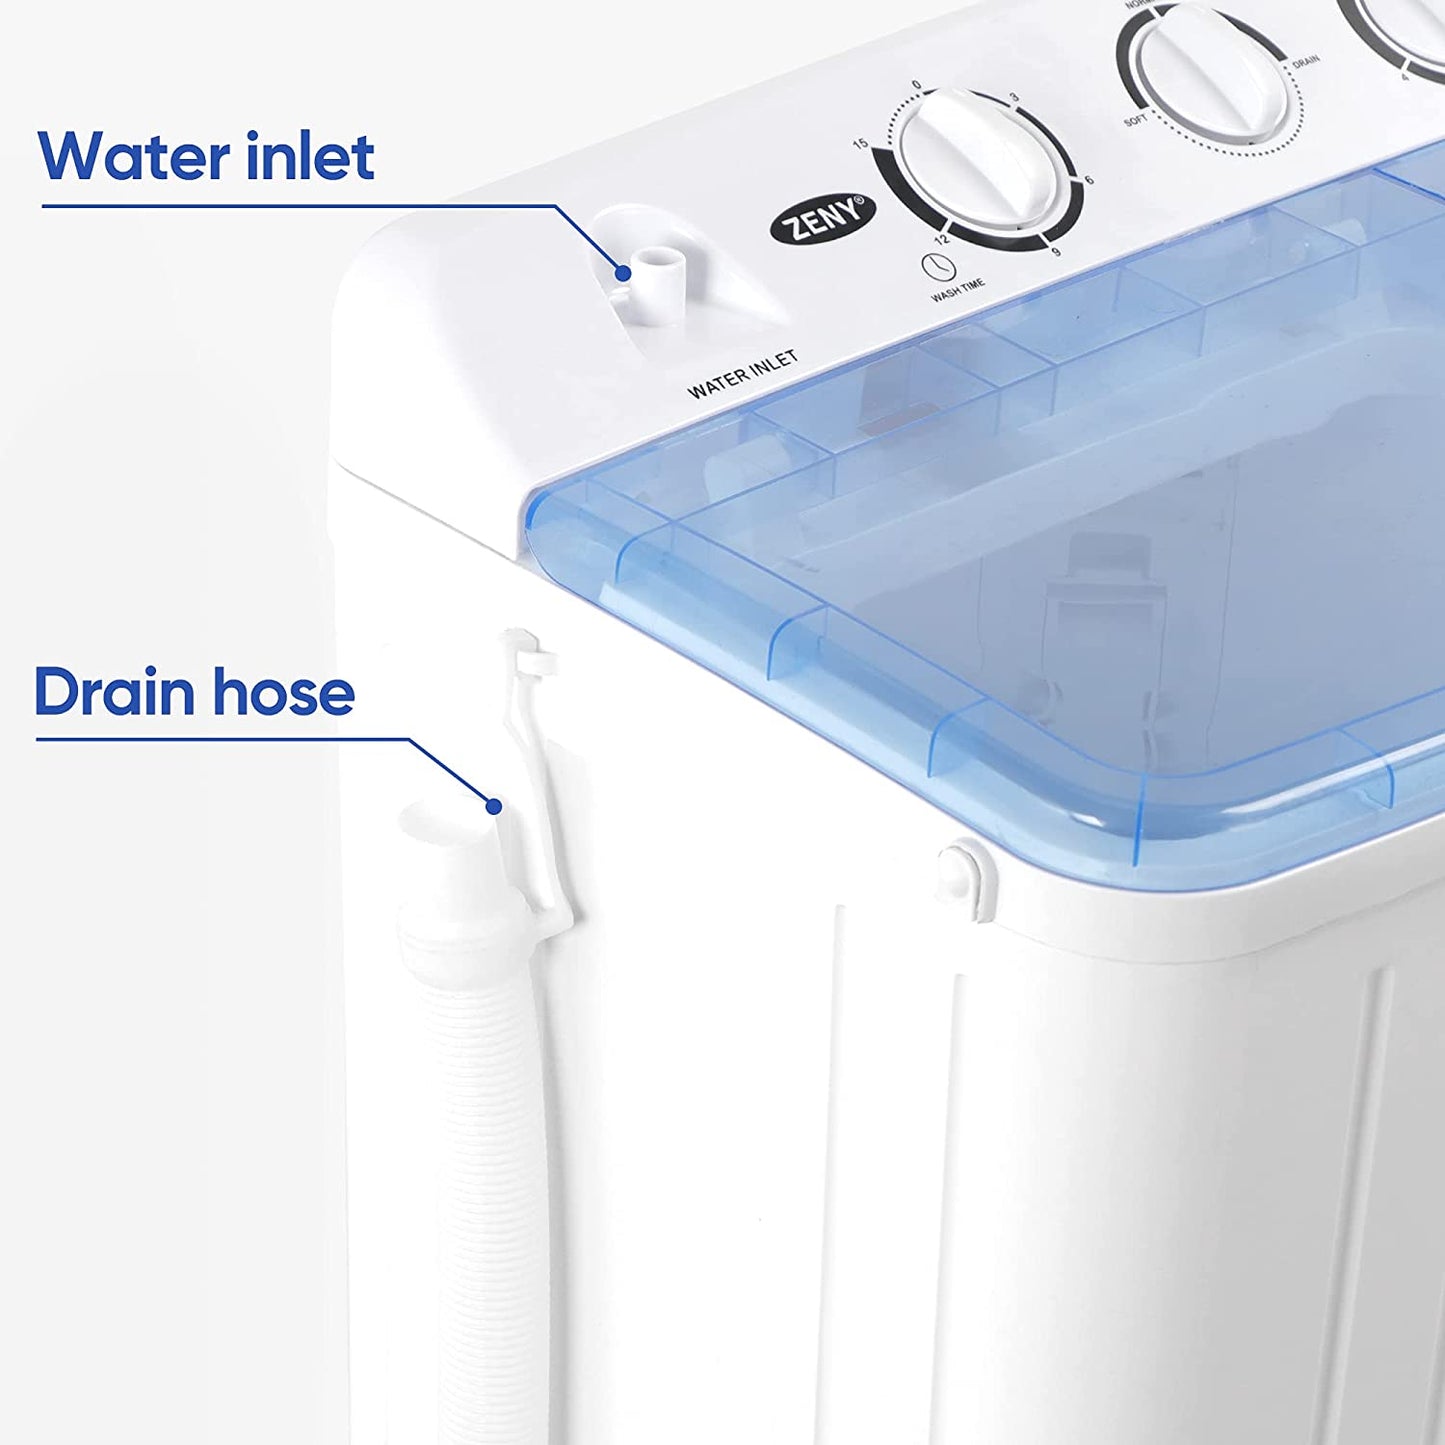 Portable Washing Machine Compact Twin Tub Laundry Washing Machine 17.6lbs Capacity Mini Washer Spinner for Apartment RV Travelling,Semi-Automatic